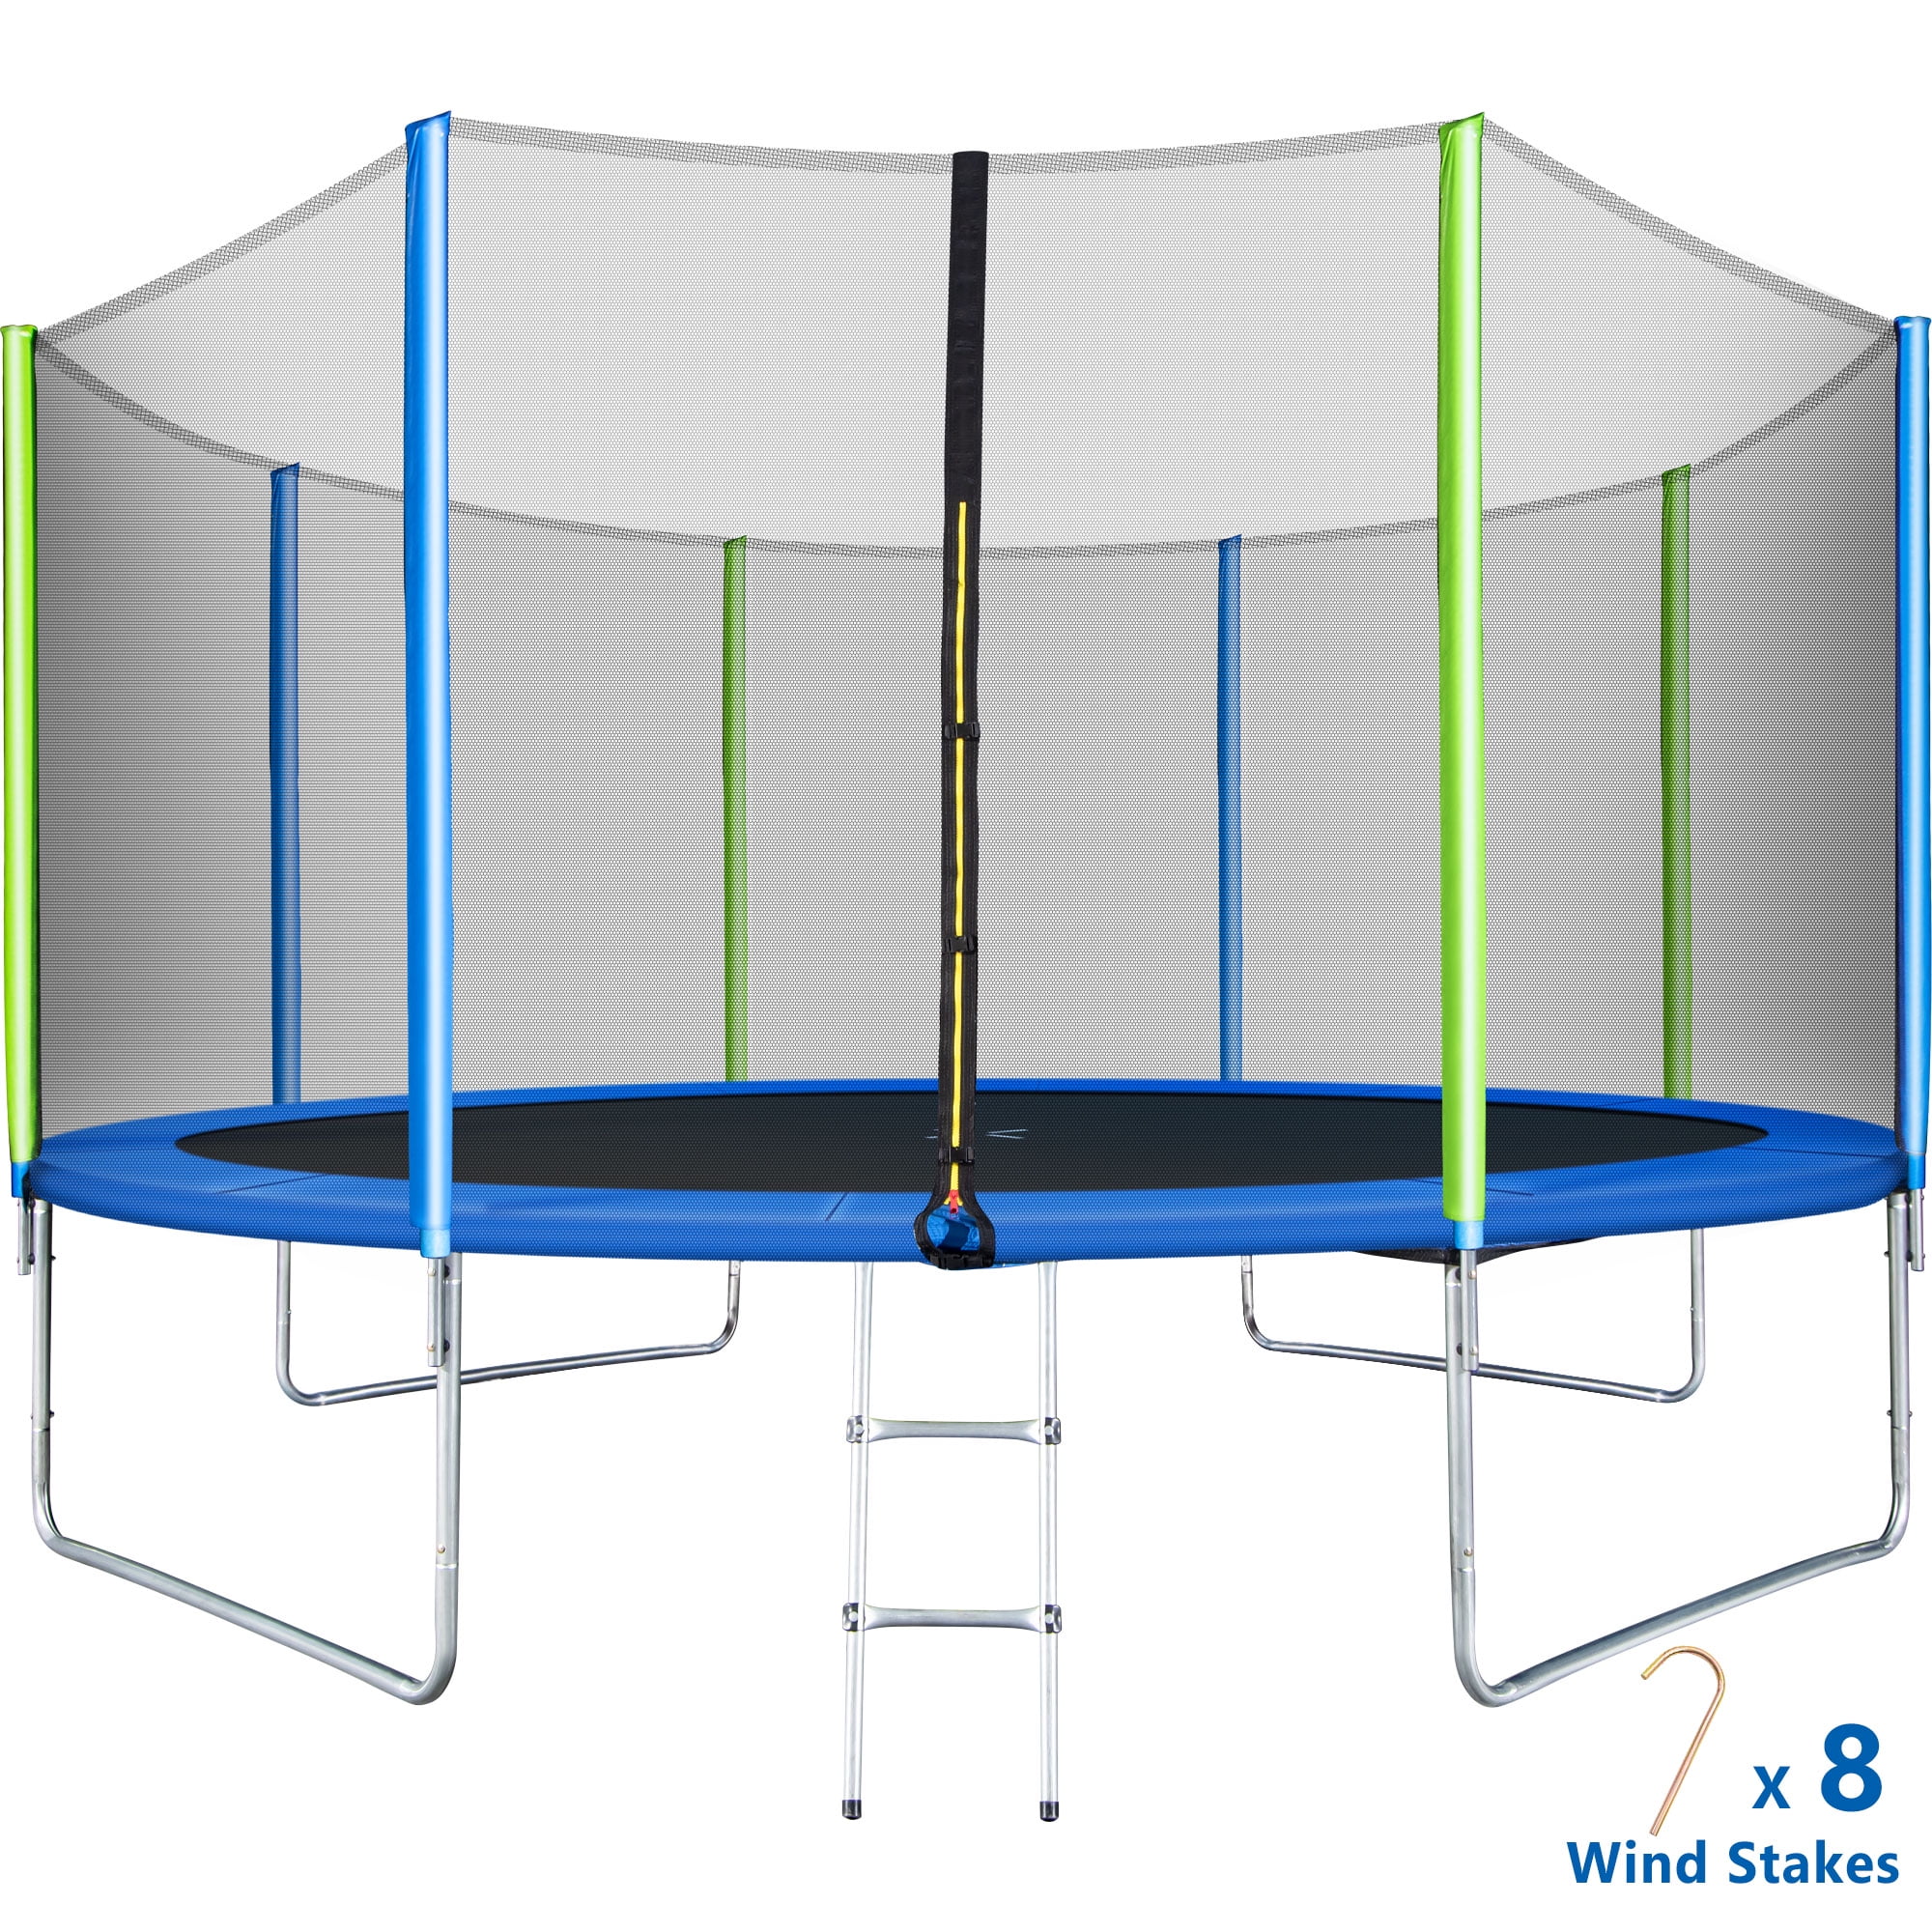 US Fast Delivered 12 FT Kids Trampoline with Enclosure Net Jumping Mat Safety Pad Ladder and Spring Cover Padding Indoor Outdoor Yard Trampolines for Children